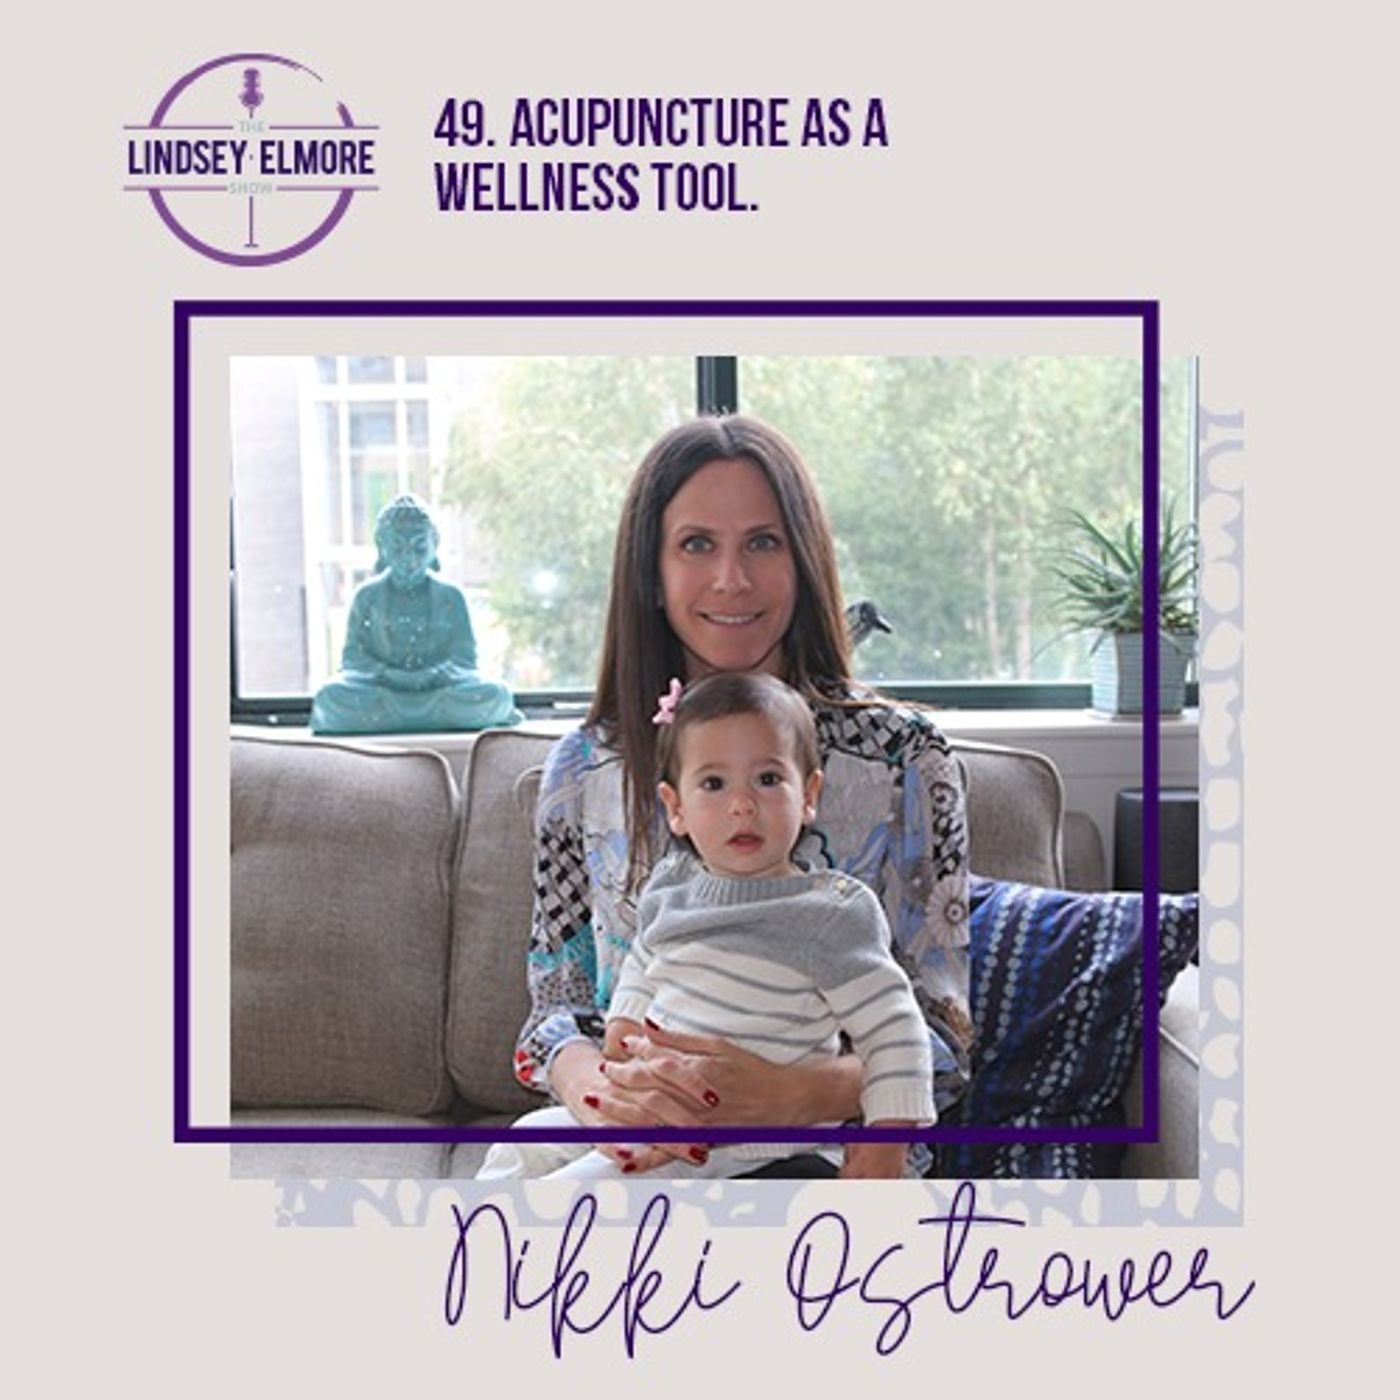 Acupuncture as a wellness tool. An interview with Nikki Ostrower.